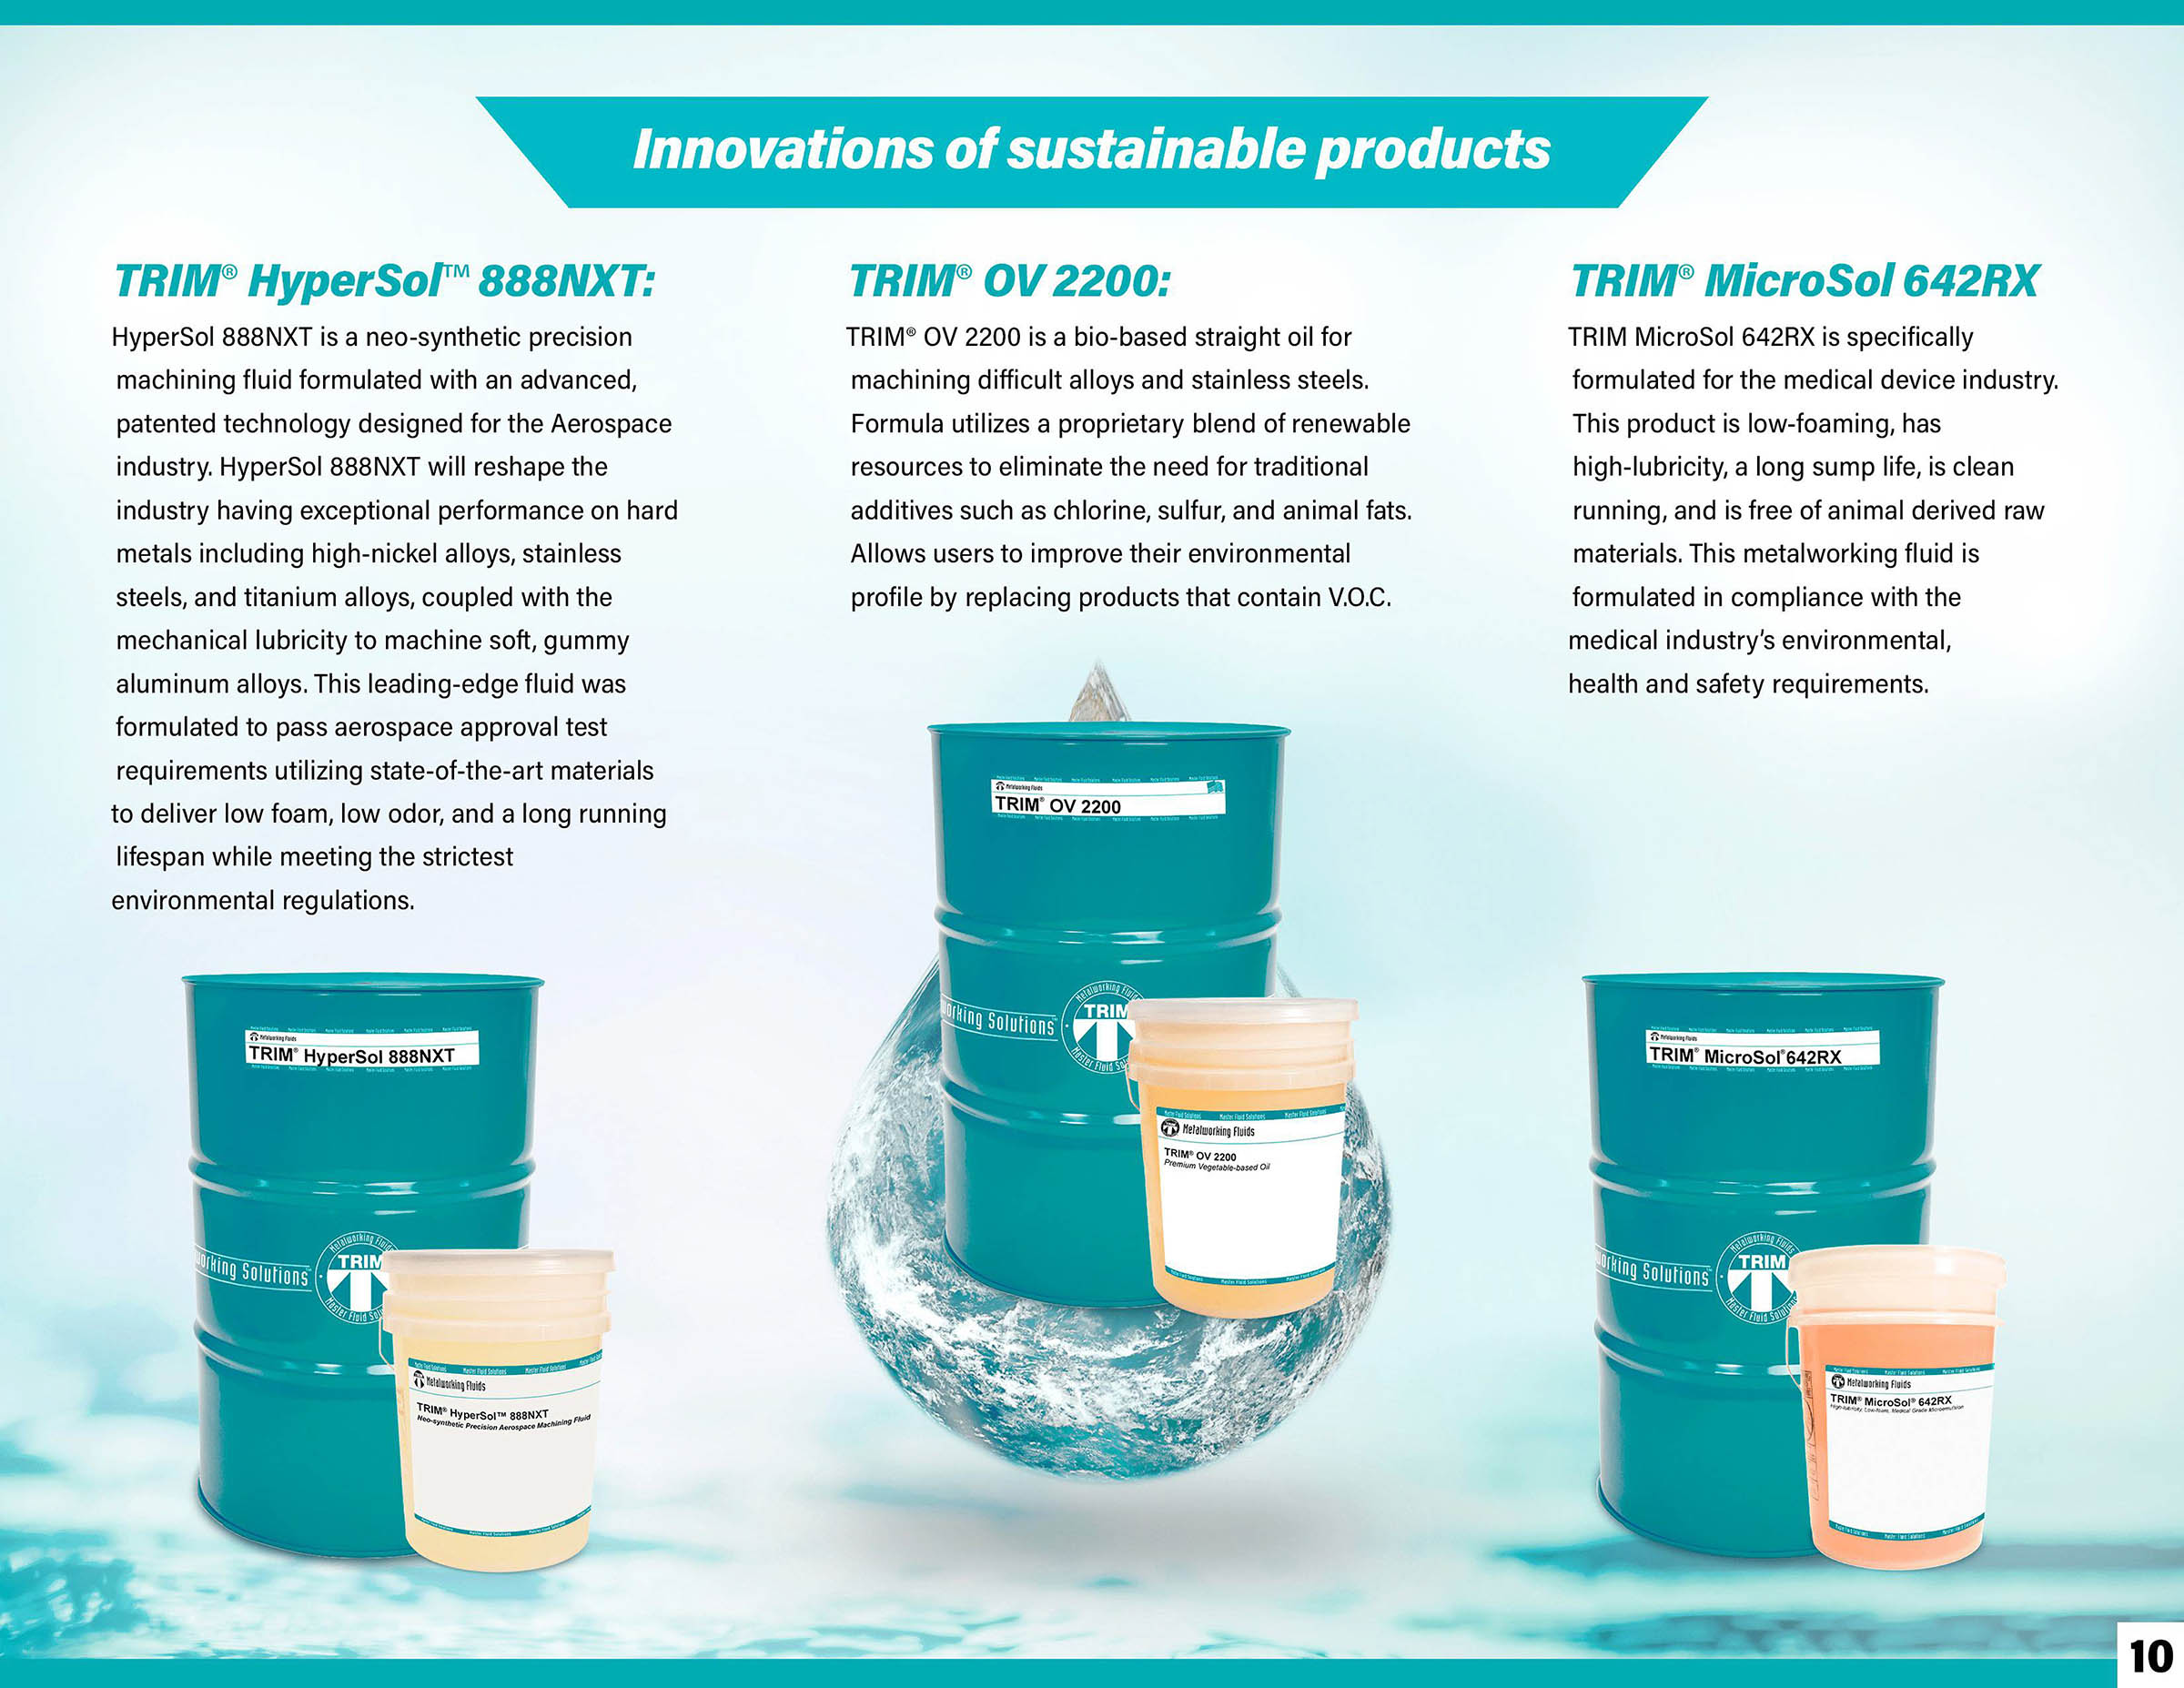 Sustainability Report - Innovations of sustainable products